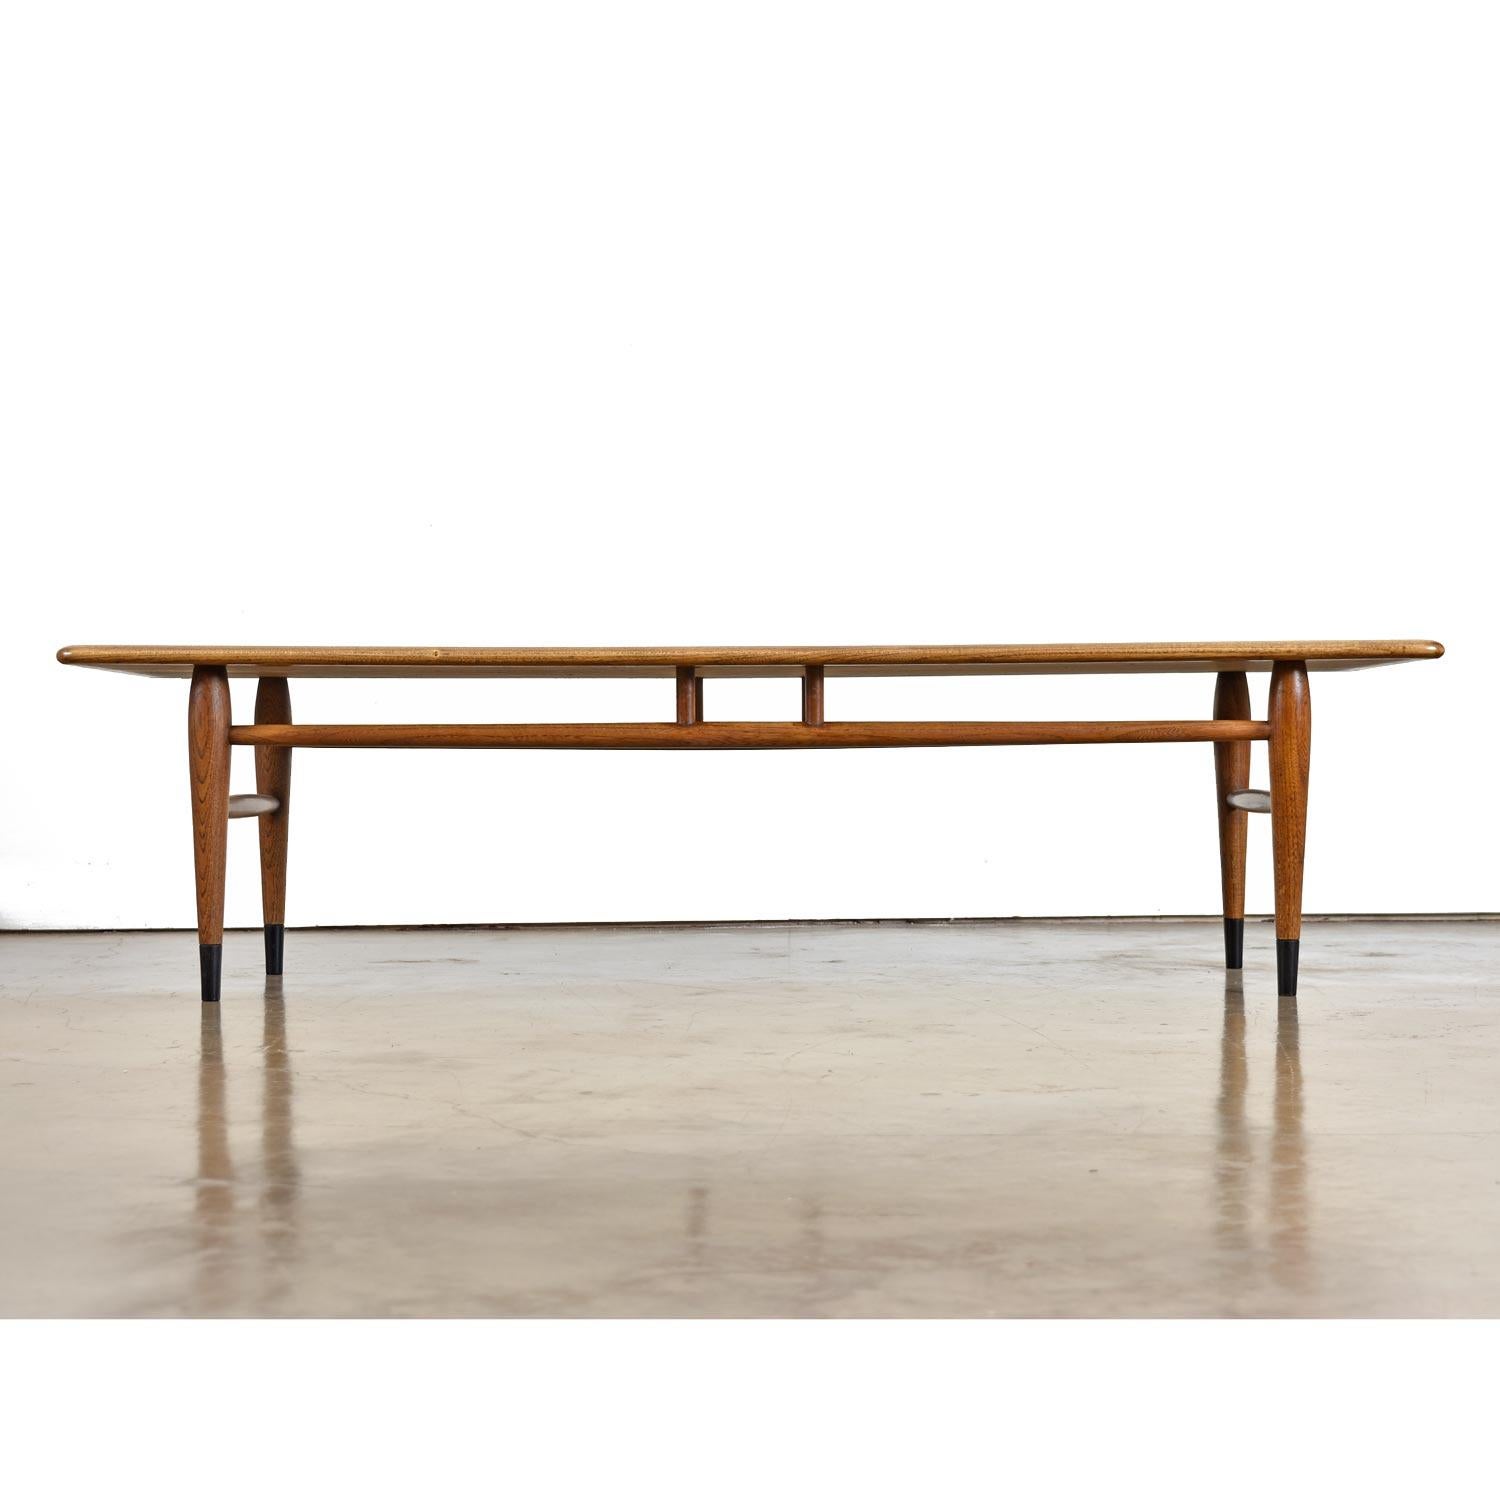 The Lane Acclaim collection has become an American Mid-Century Modern Classic. The two-tone oak on walnut with exaggerated dove-tail design has become sought after by collectors nationwide. Produced for over ten years between the 1960s and early